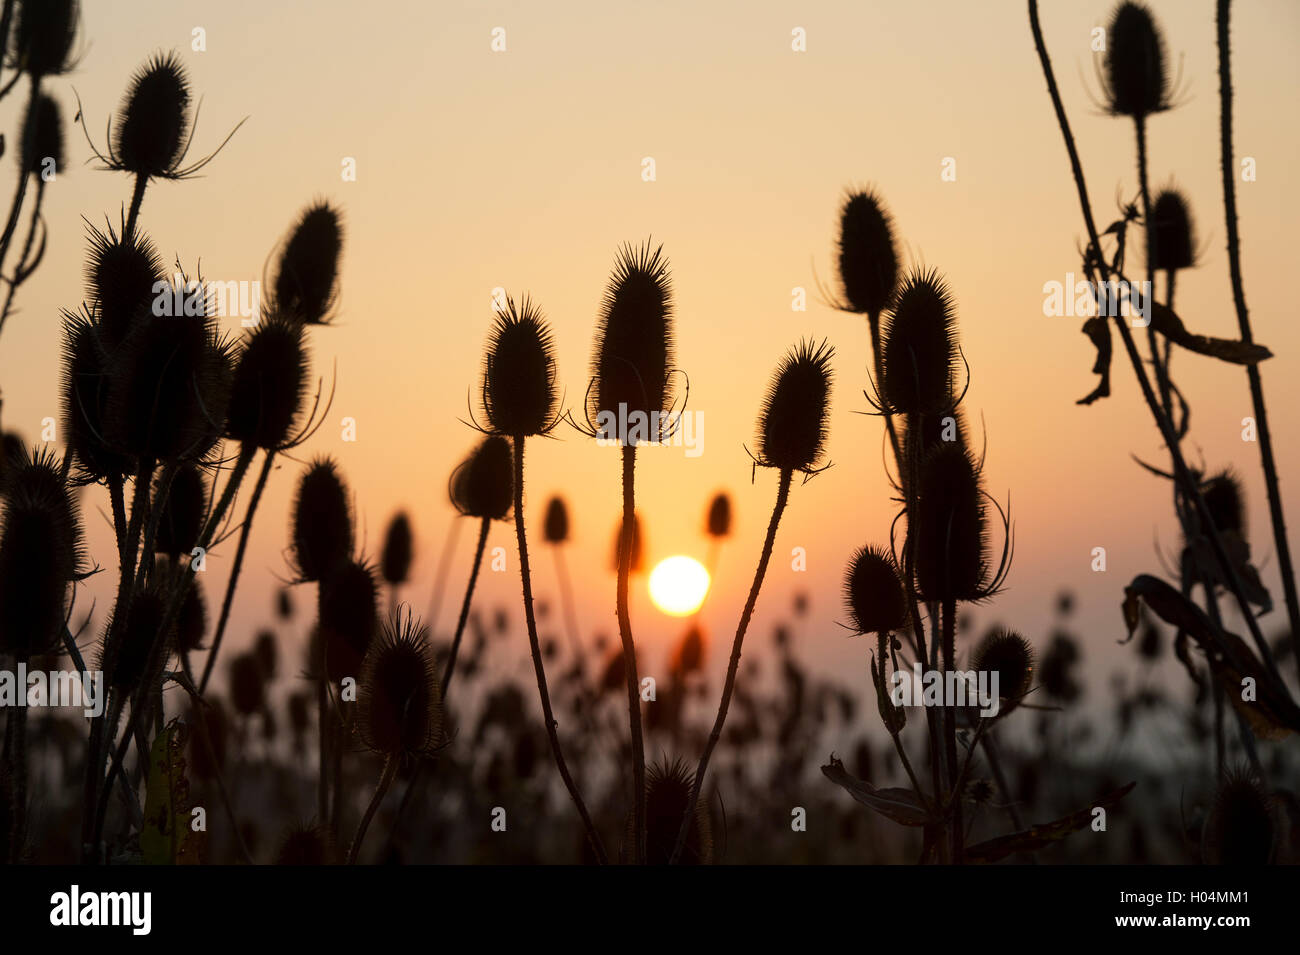 Silhouette of teasel plants in the English countryside in front of the early morning sunrise Stock Photo